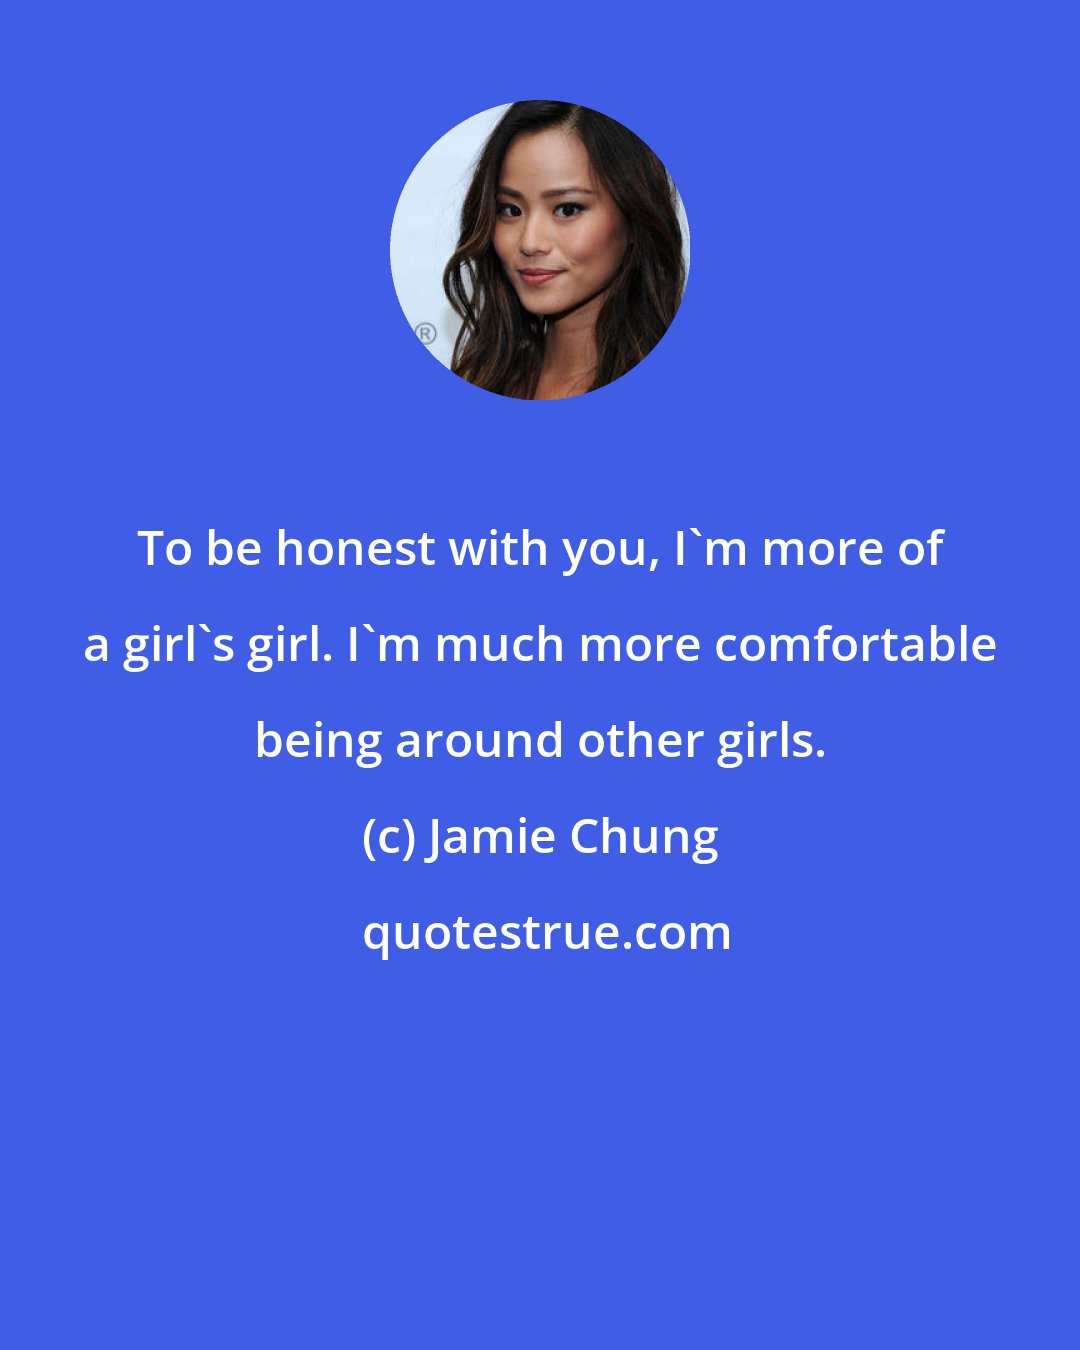 Jamie Chung: To be honest with you, I'm more of a girl's girl. I'm much more comfortable being around other girls.